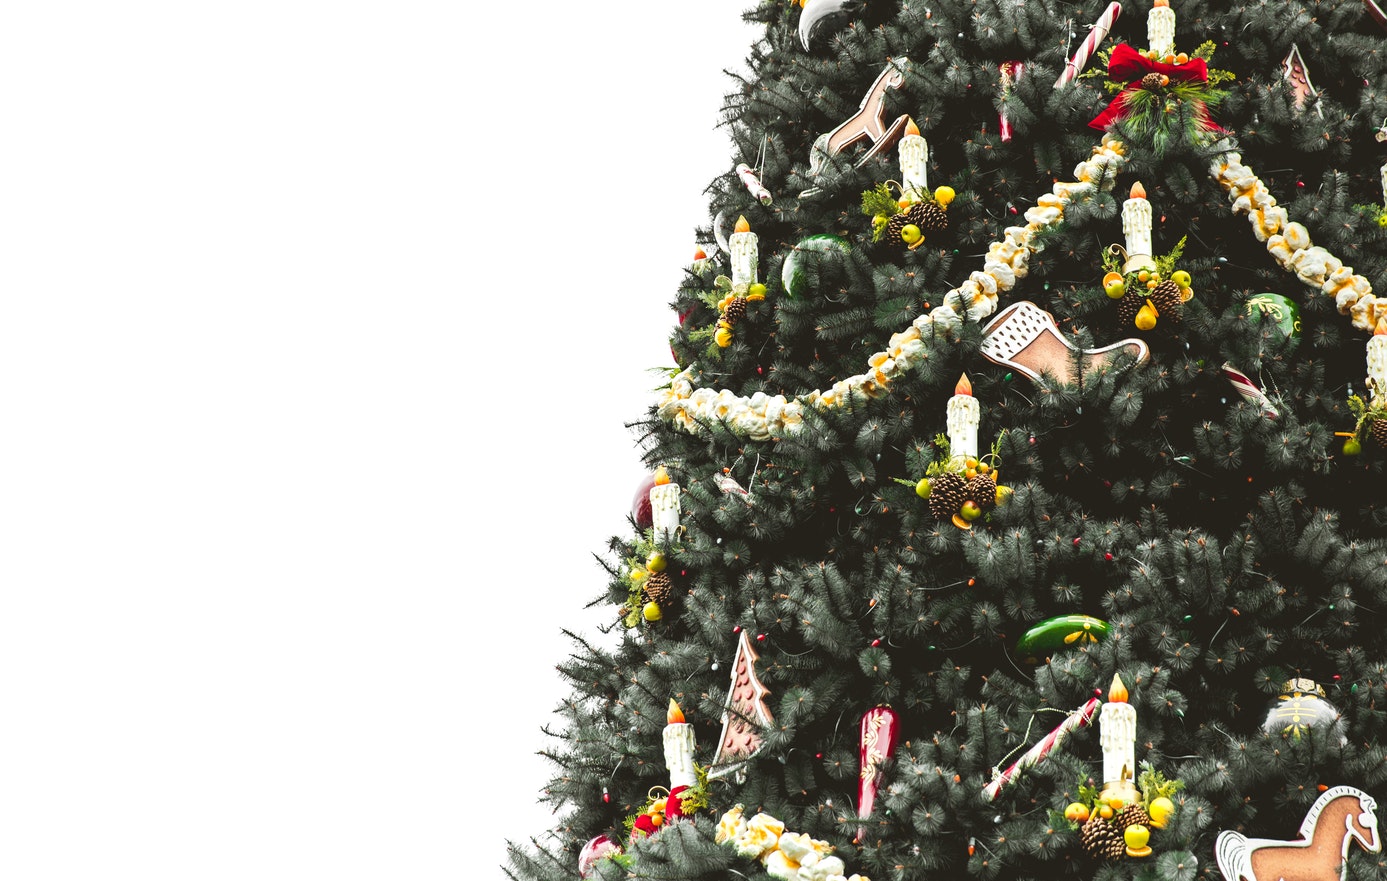 How Did Trees Become Associated With Christmas?